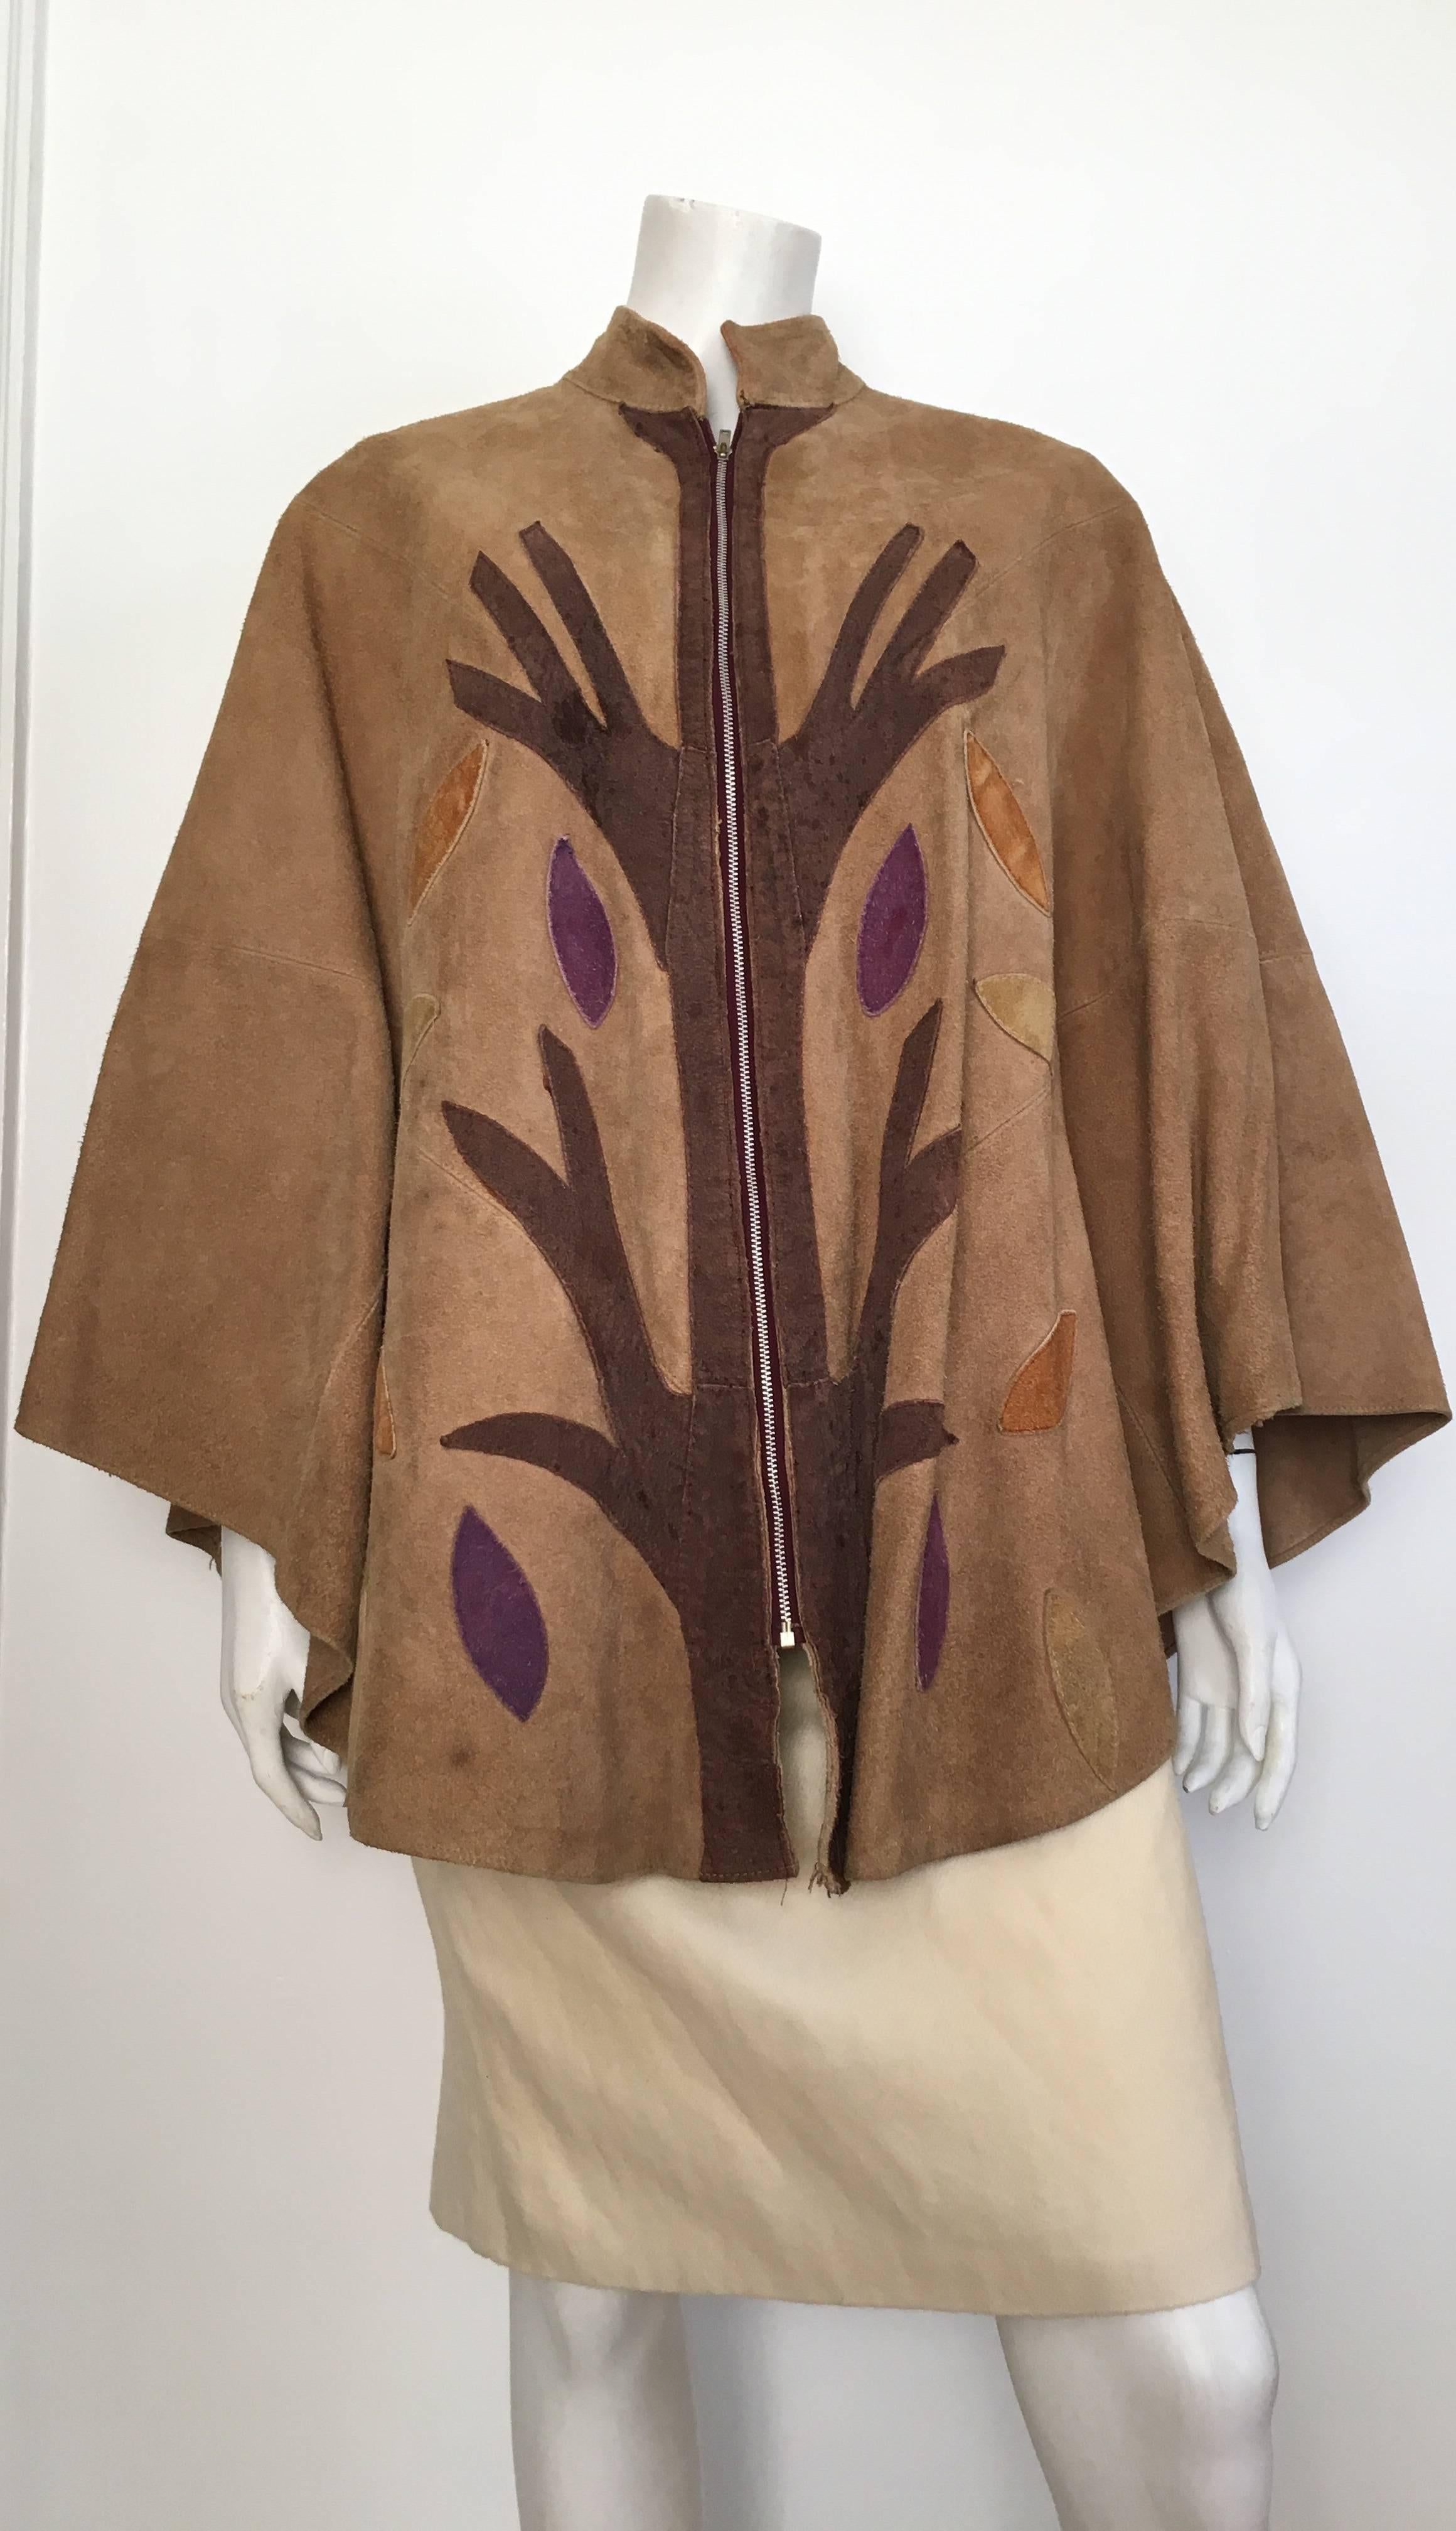 Queen of Capes 1980s tan suede zipper front with 'Tree of Life' pattern cape.  This gorgeous suede cape will fit size 2, 4, 6, 8 comfortably. This suede cape is over 30 years ago and still looks amazing today. Capes never go out of STYLE nor should